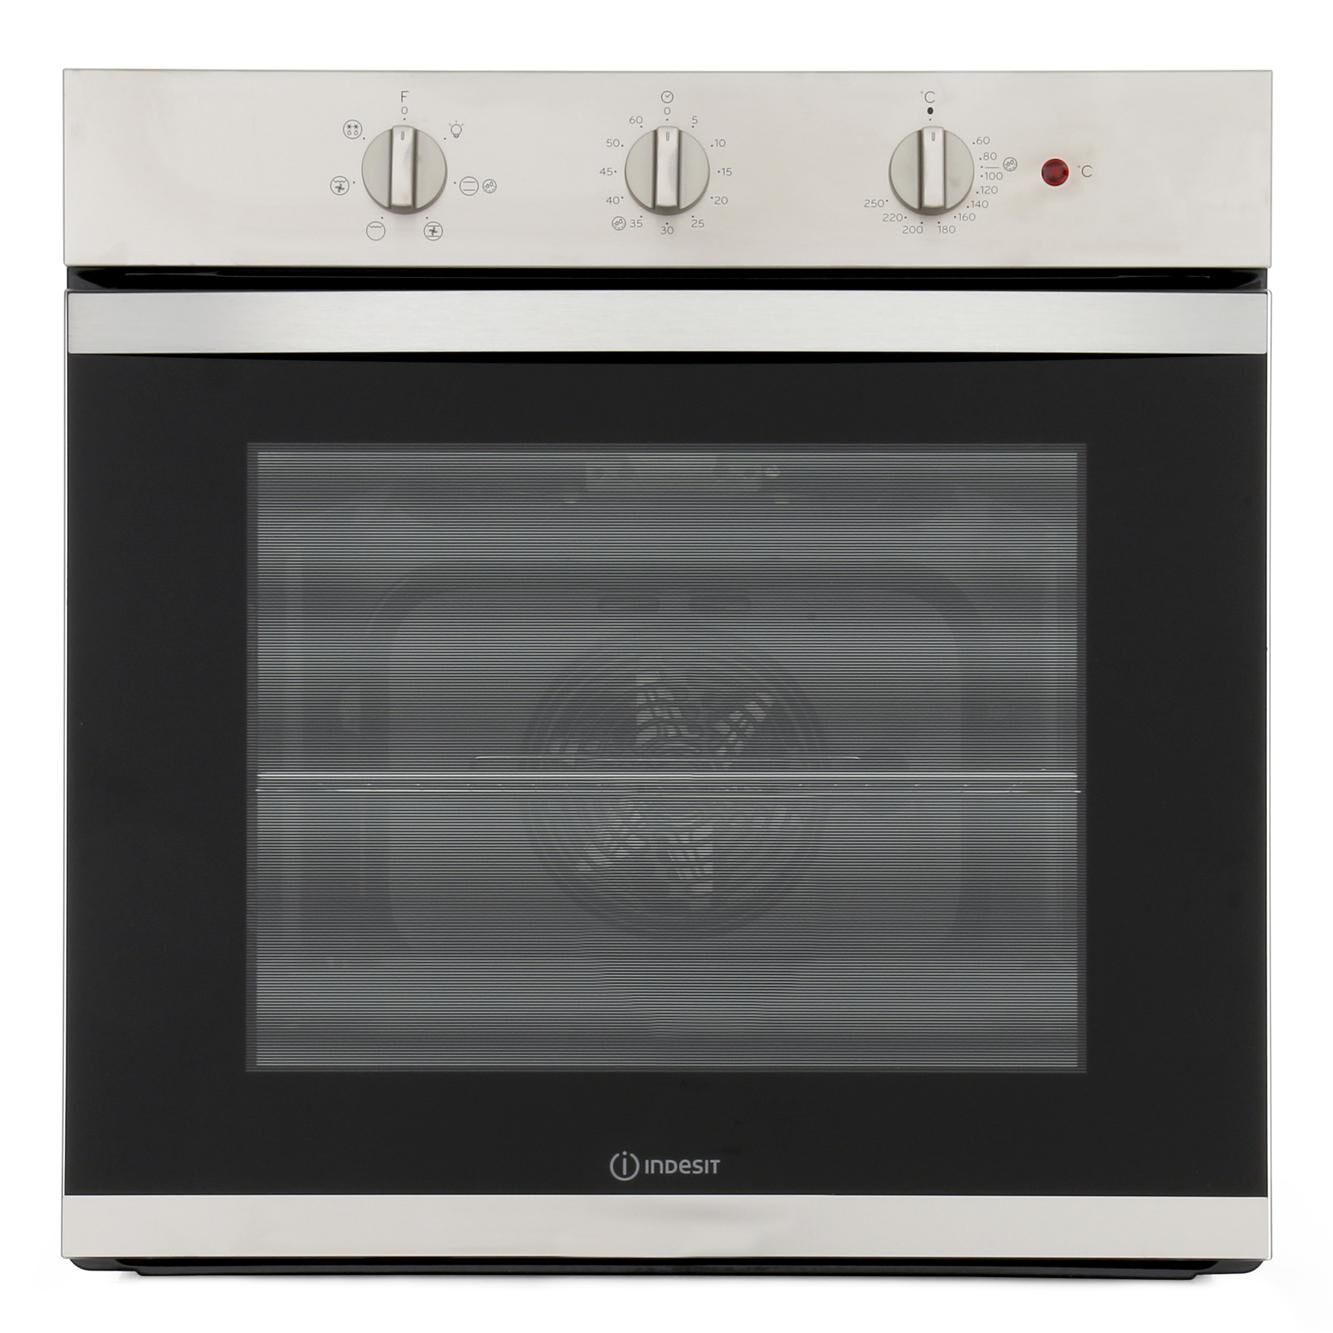 Indesit KFW 3543 H IX UK Single Built In Electric Oven